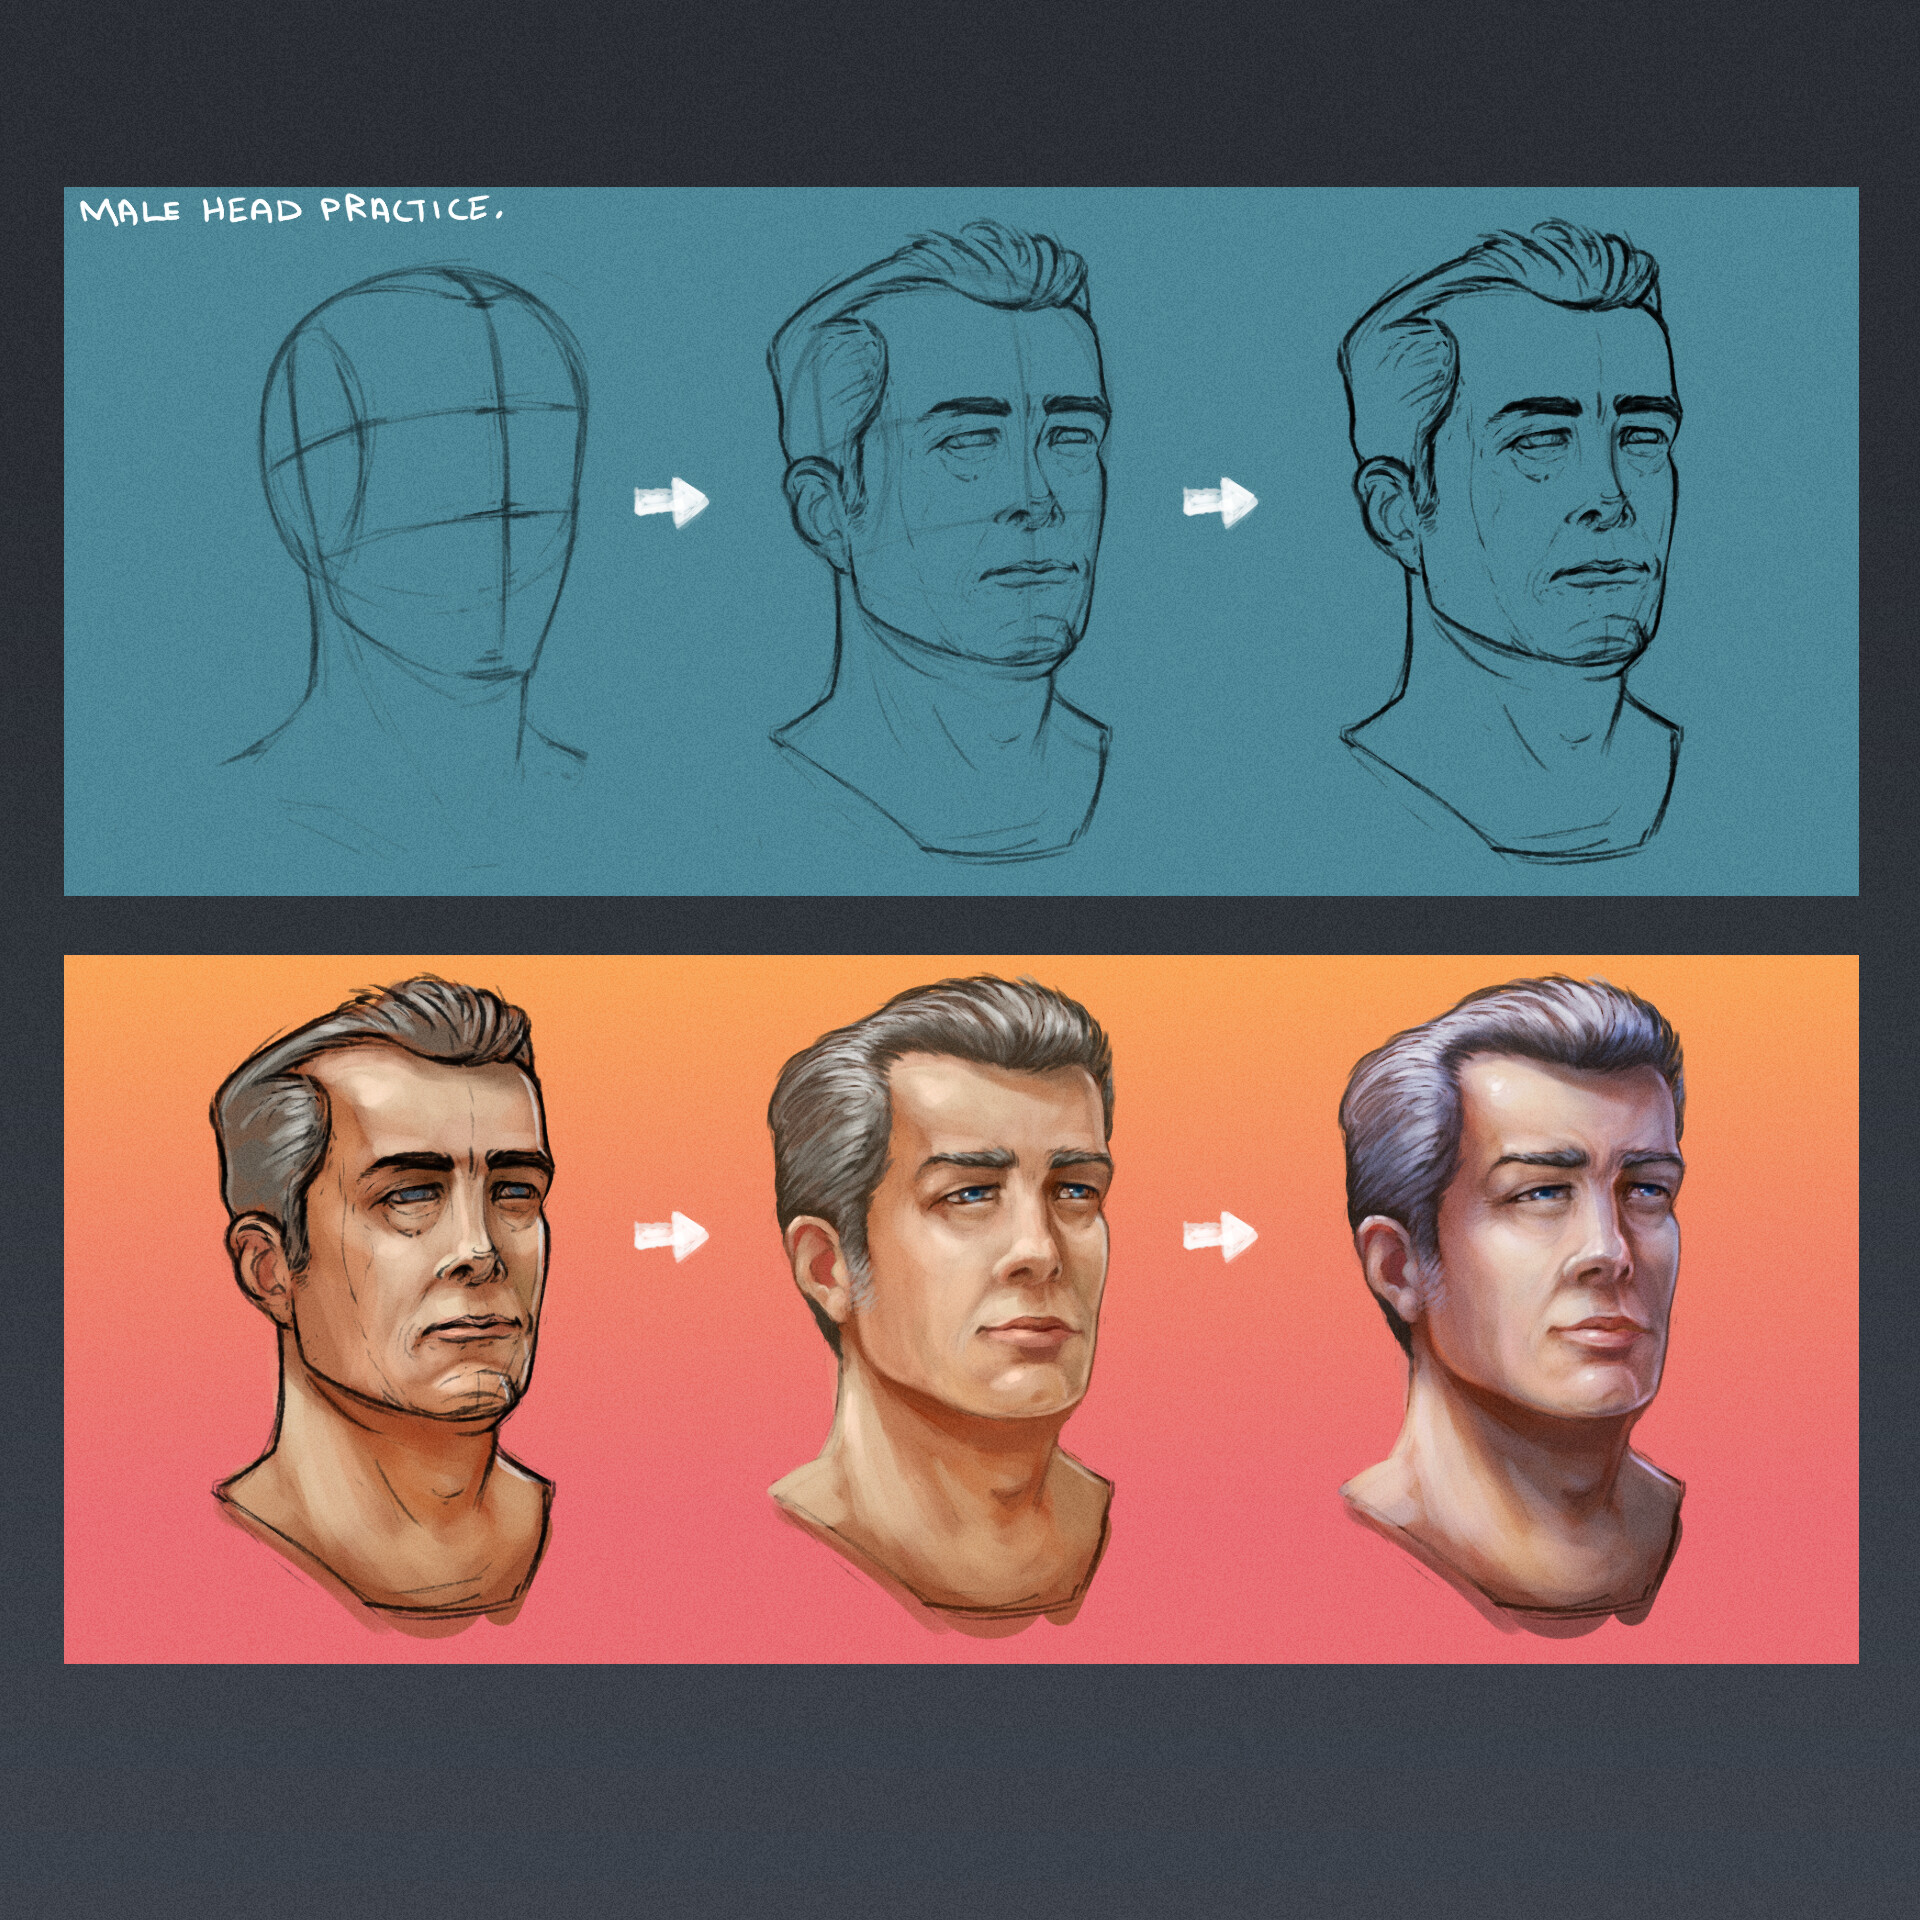 How to Draw The Front View of The Male Head